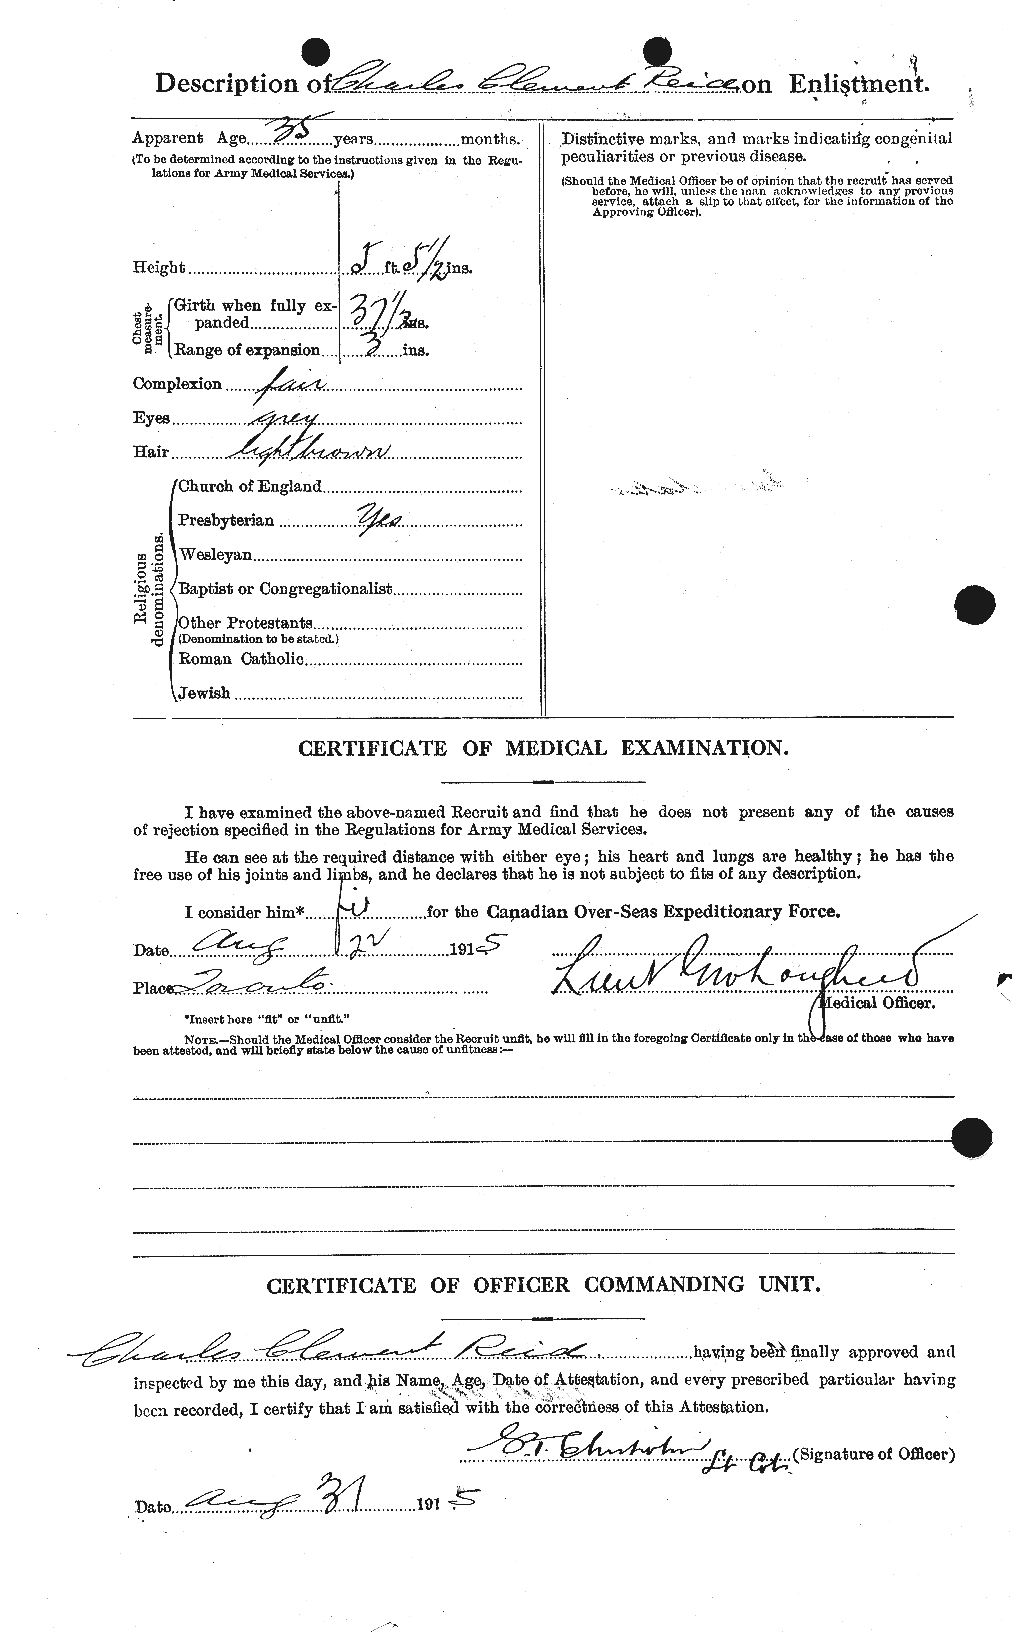 Personnel Records of the First World War - CEF 597885b